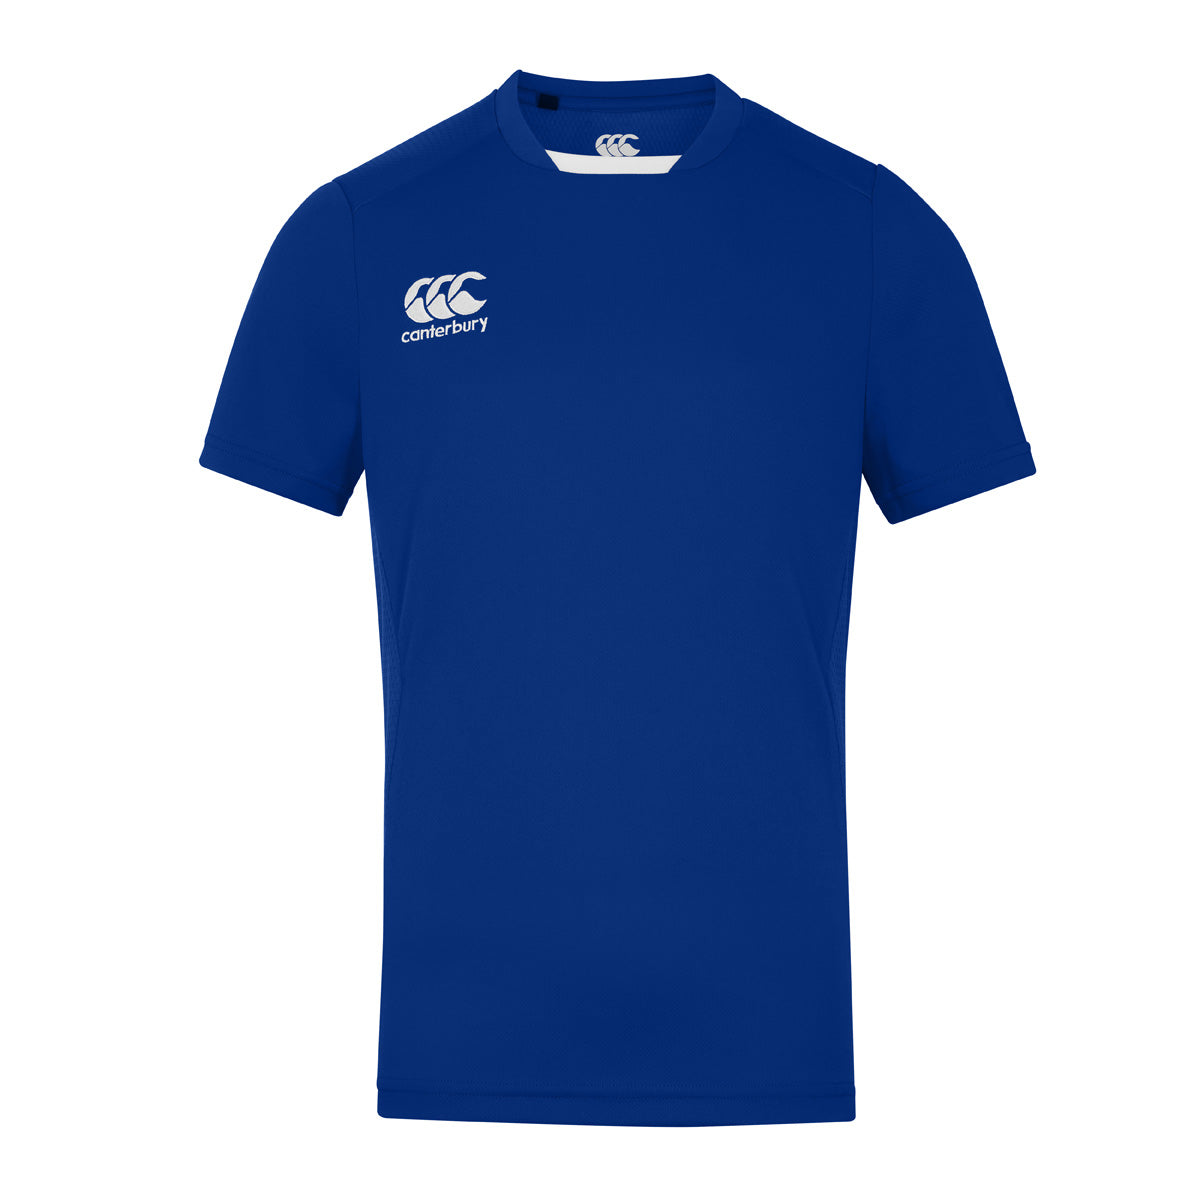 Photo of the Canterbury Club Dry Tee Junior Blue, pictured from the front